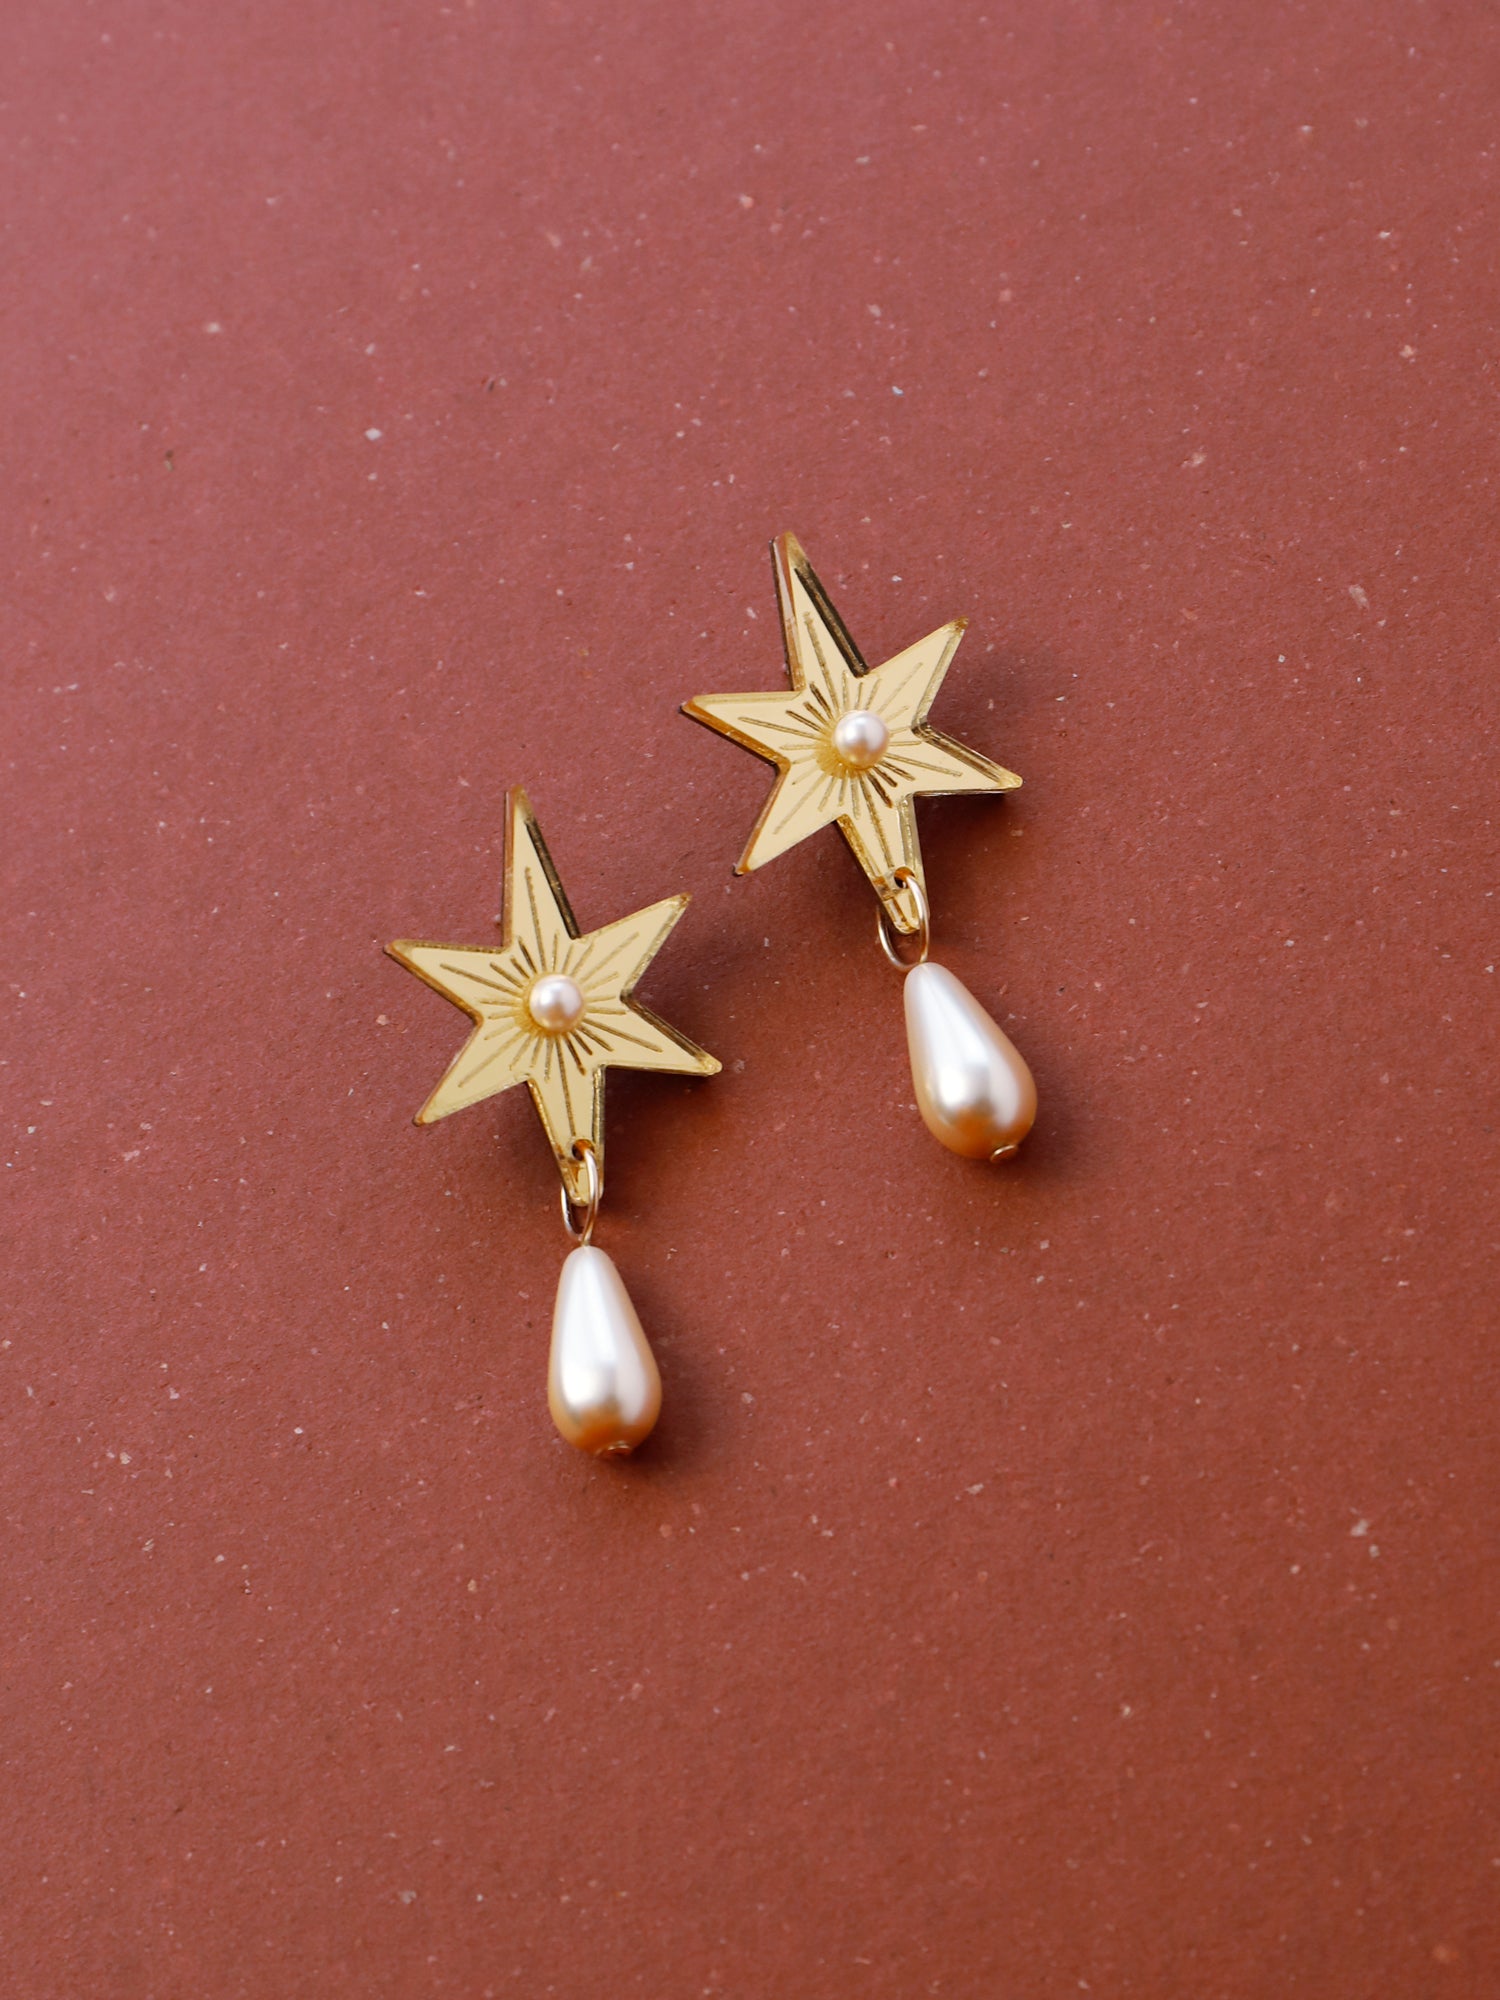 Statement star studs made with gold mirrored acrylic, embellished with glass pearl and bead details. Handmade in London by Wolf & Moon.